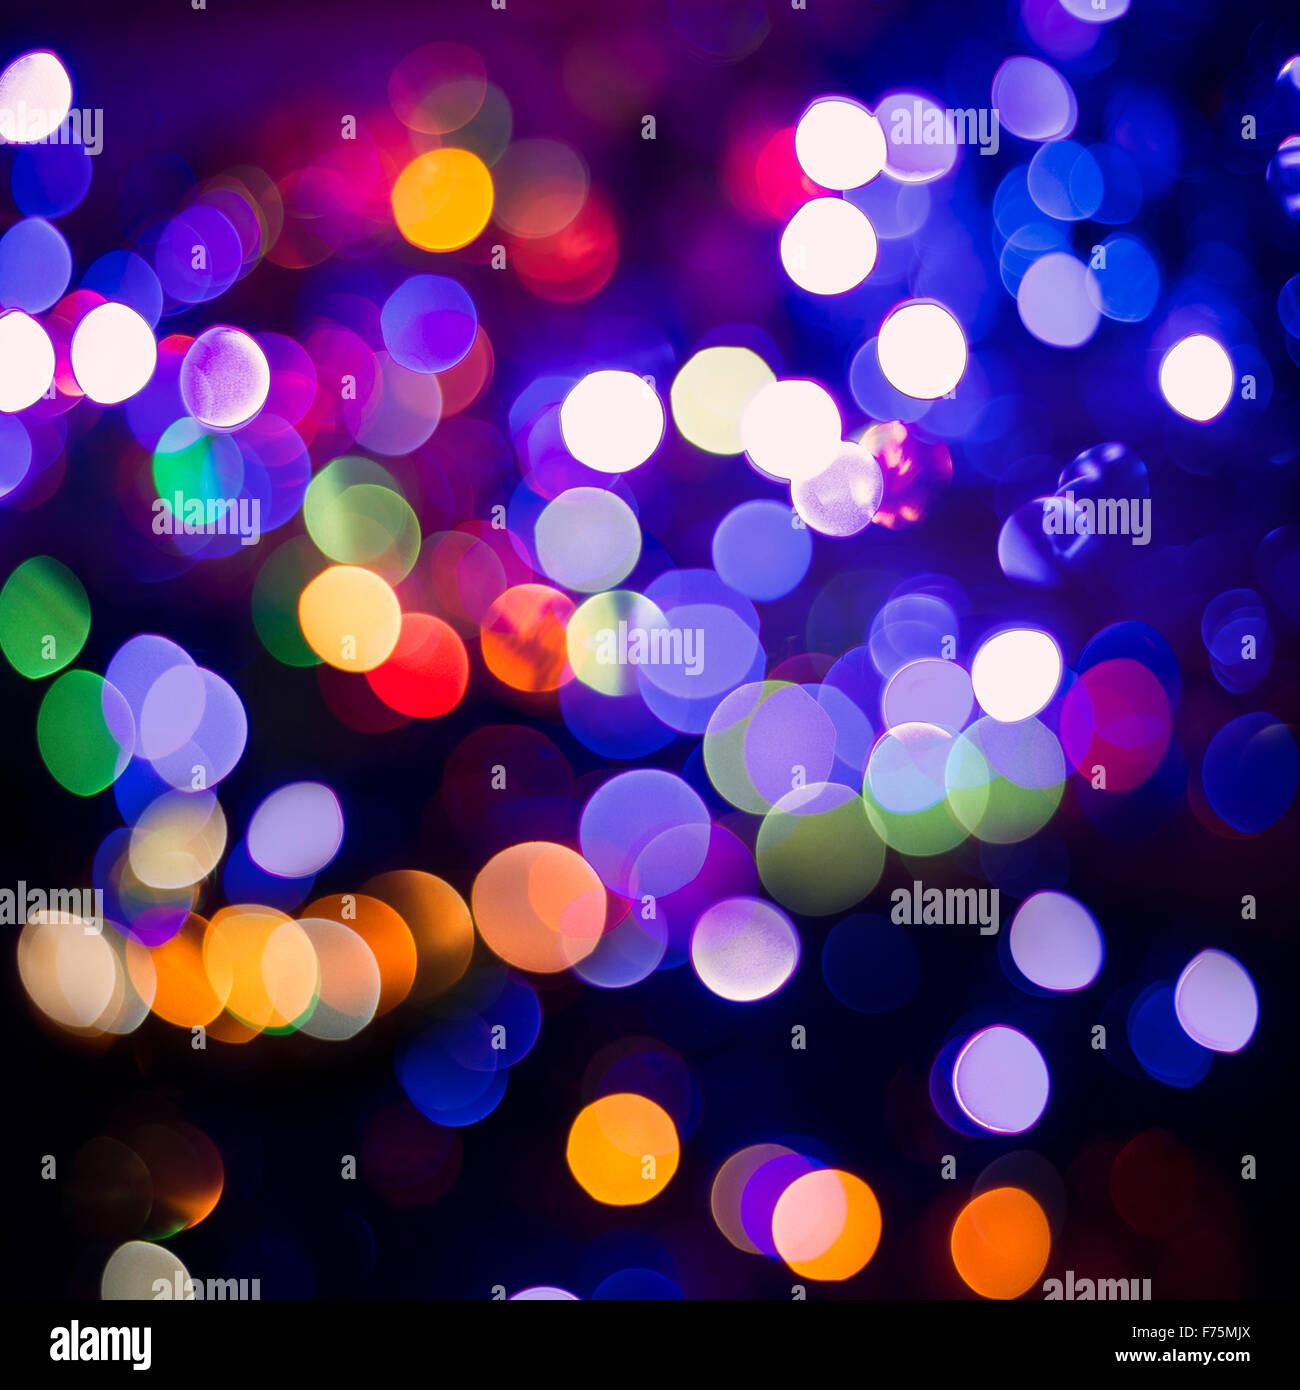 Night celebration, colorful blur light abstract background. Ideal for holiday greeting card, party invitation or web backdrop. Stock Photo